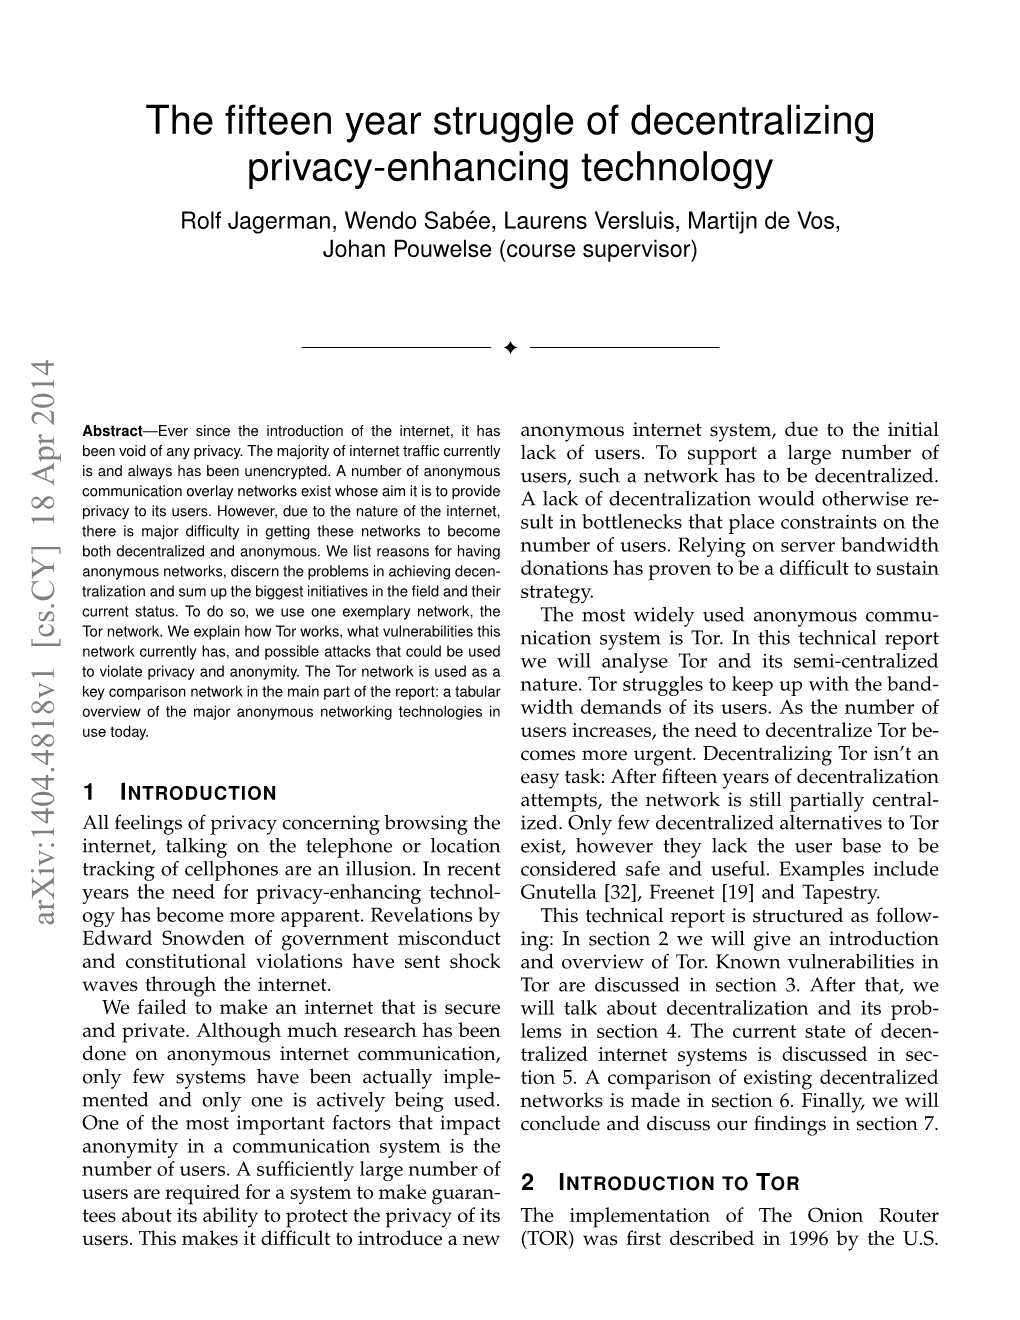 The Fifteen Year Struggle of Decentralizing Privacy-Enhancing